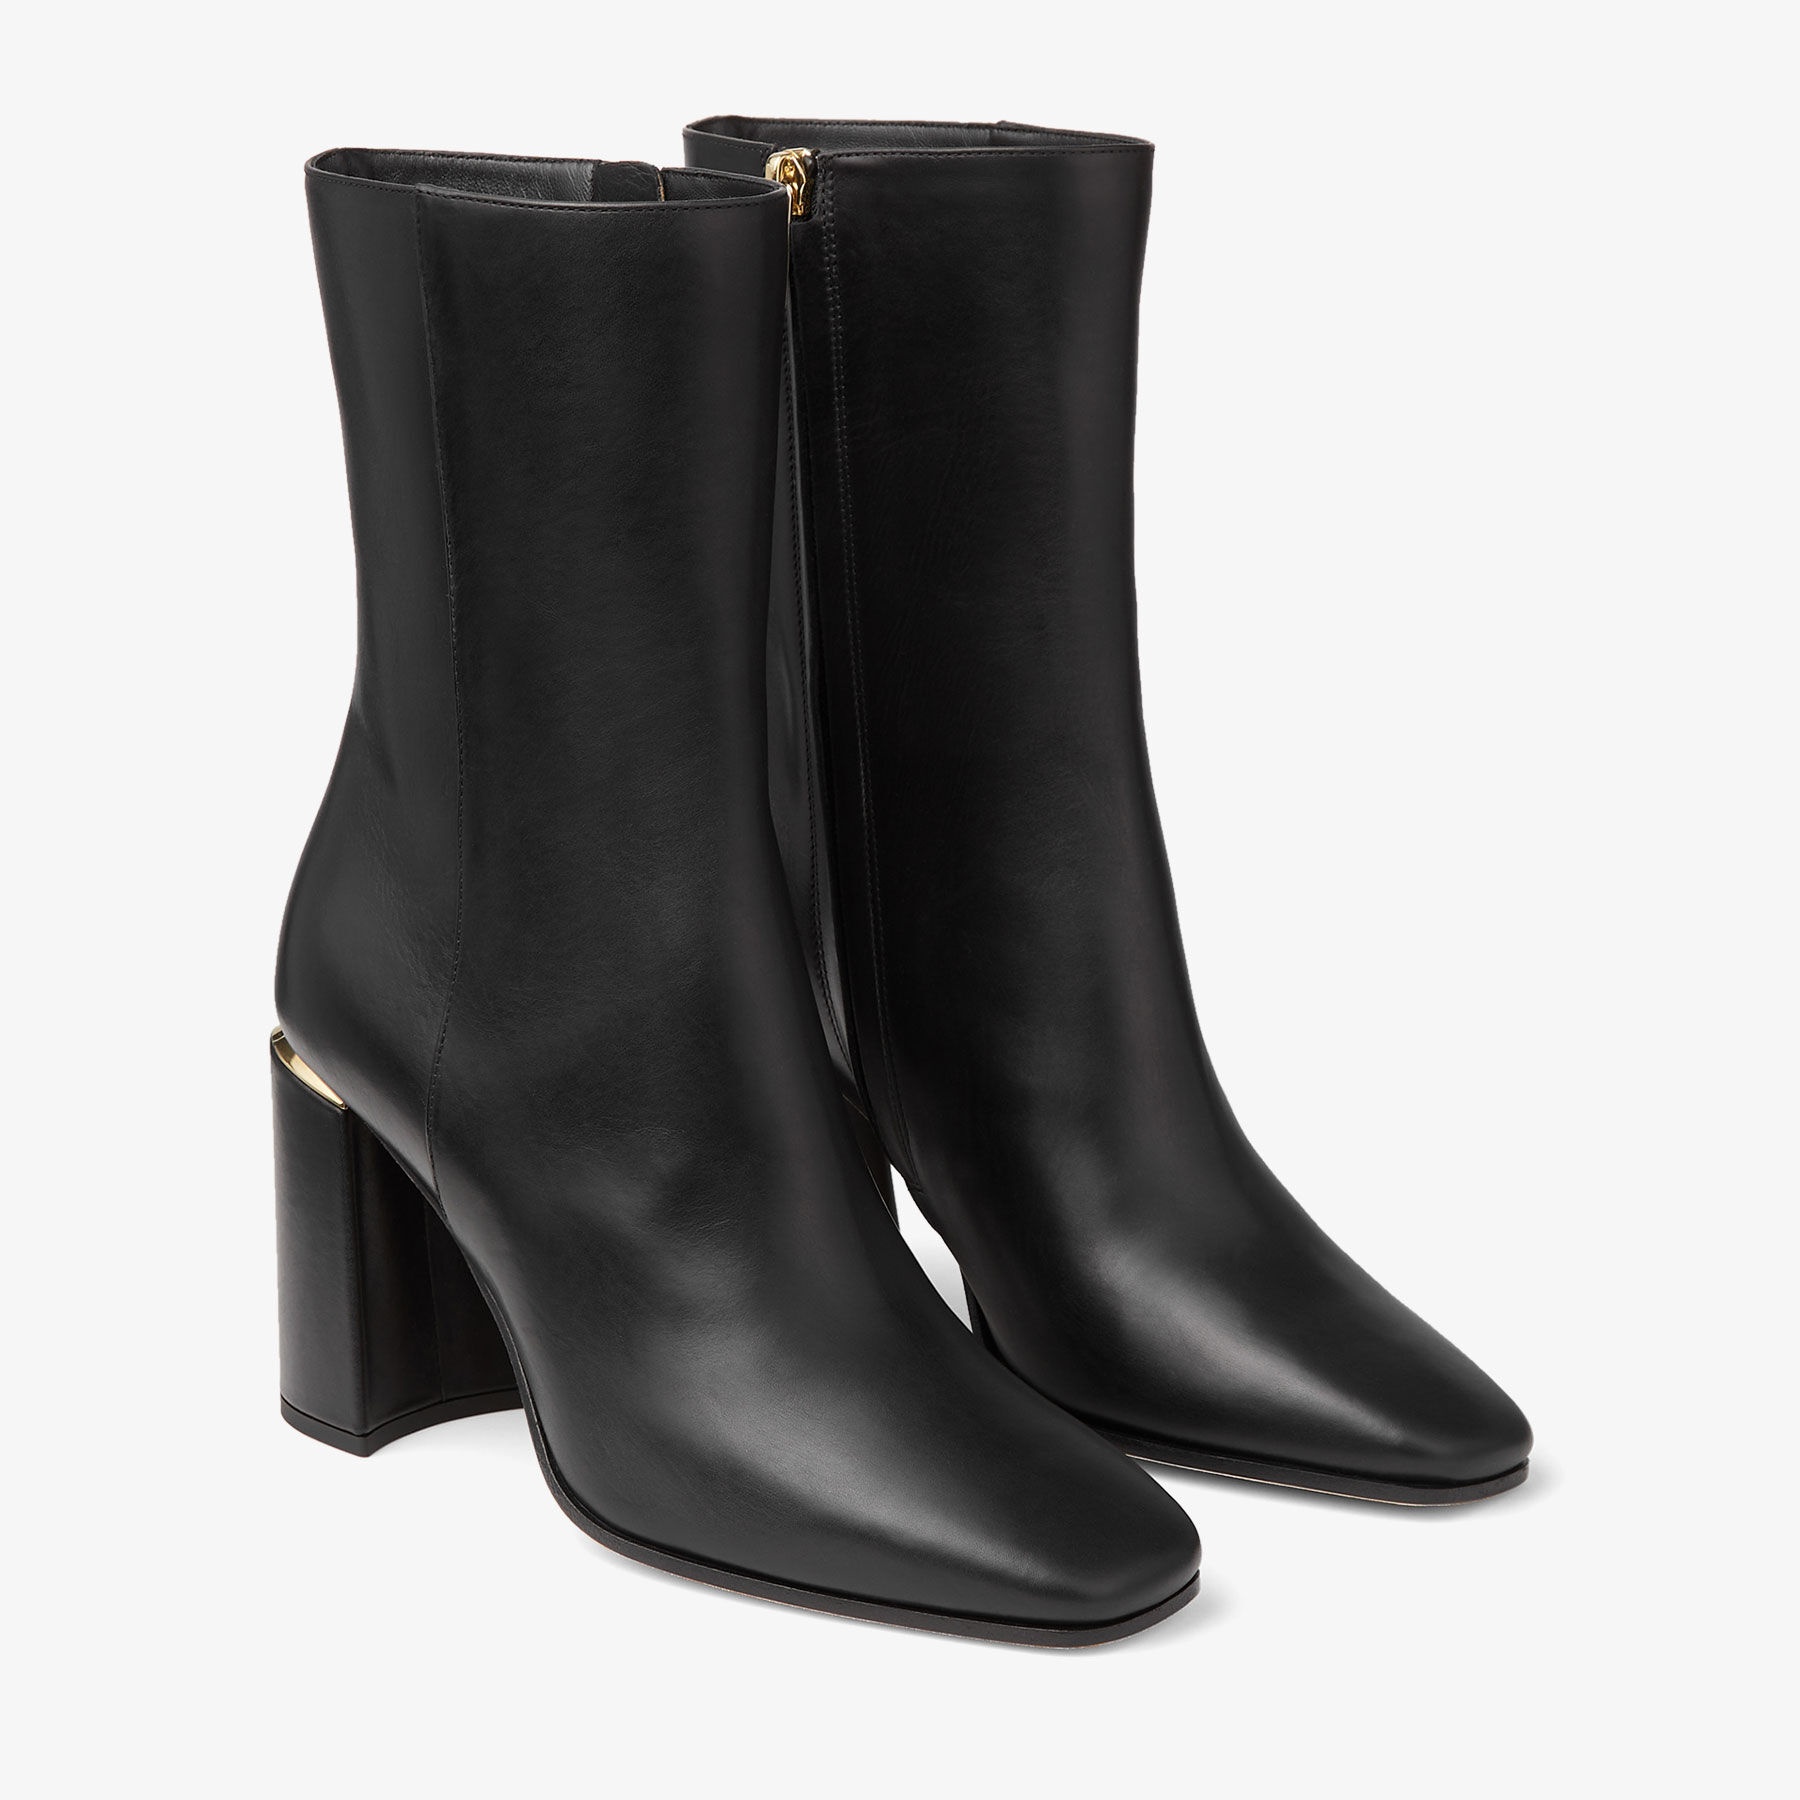 Loren Ankle Boot 85
Black Calf Leather Ankle Boots - 3